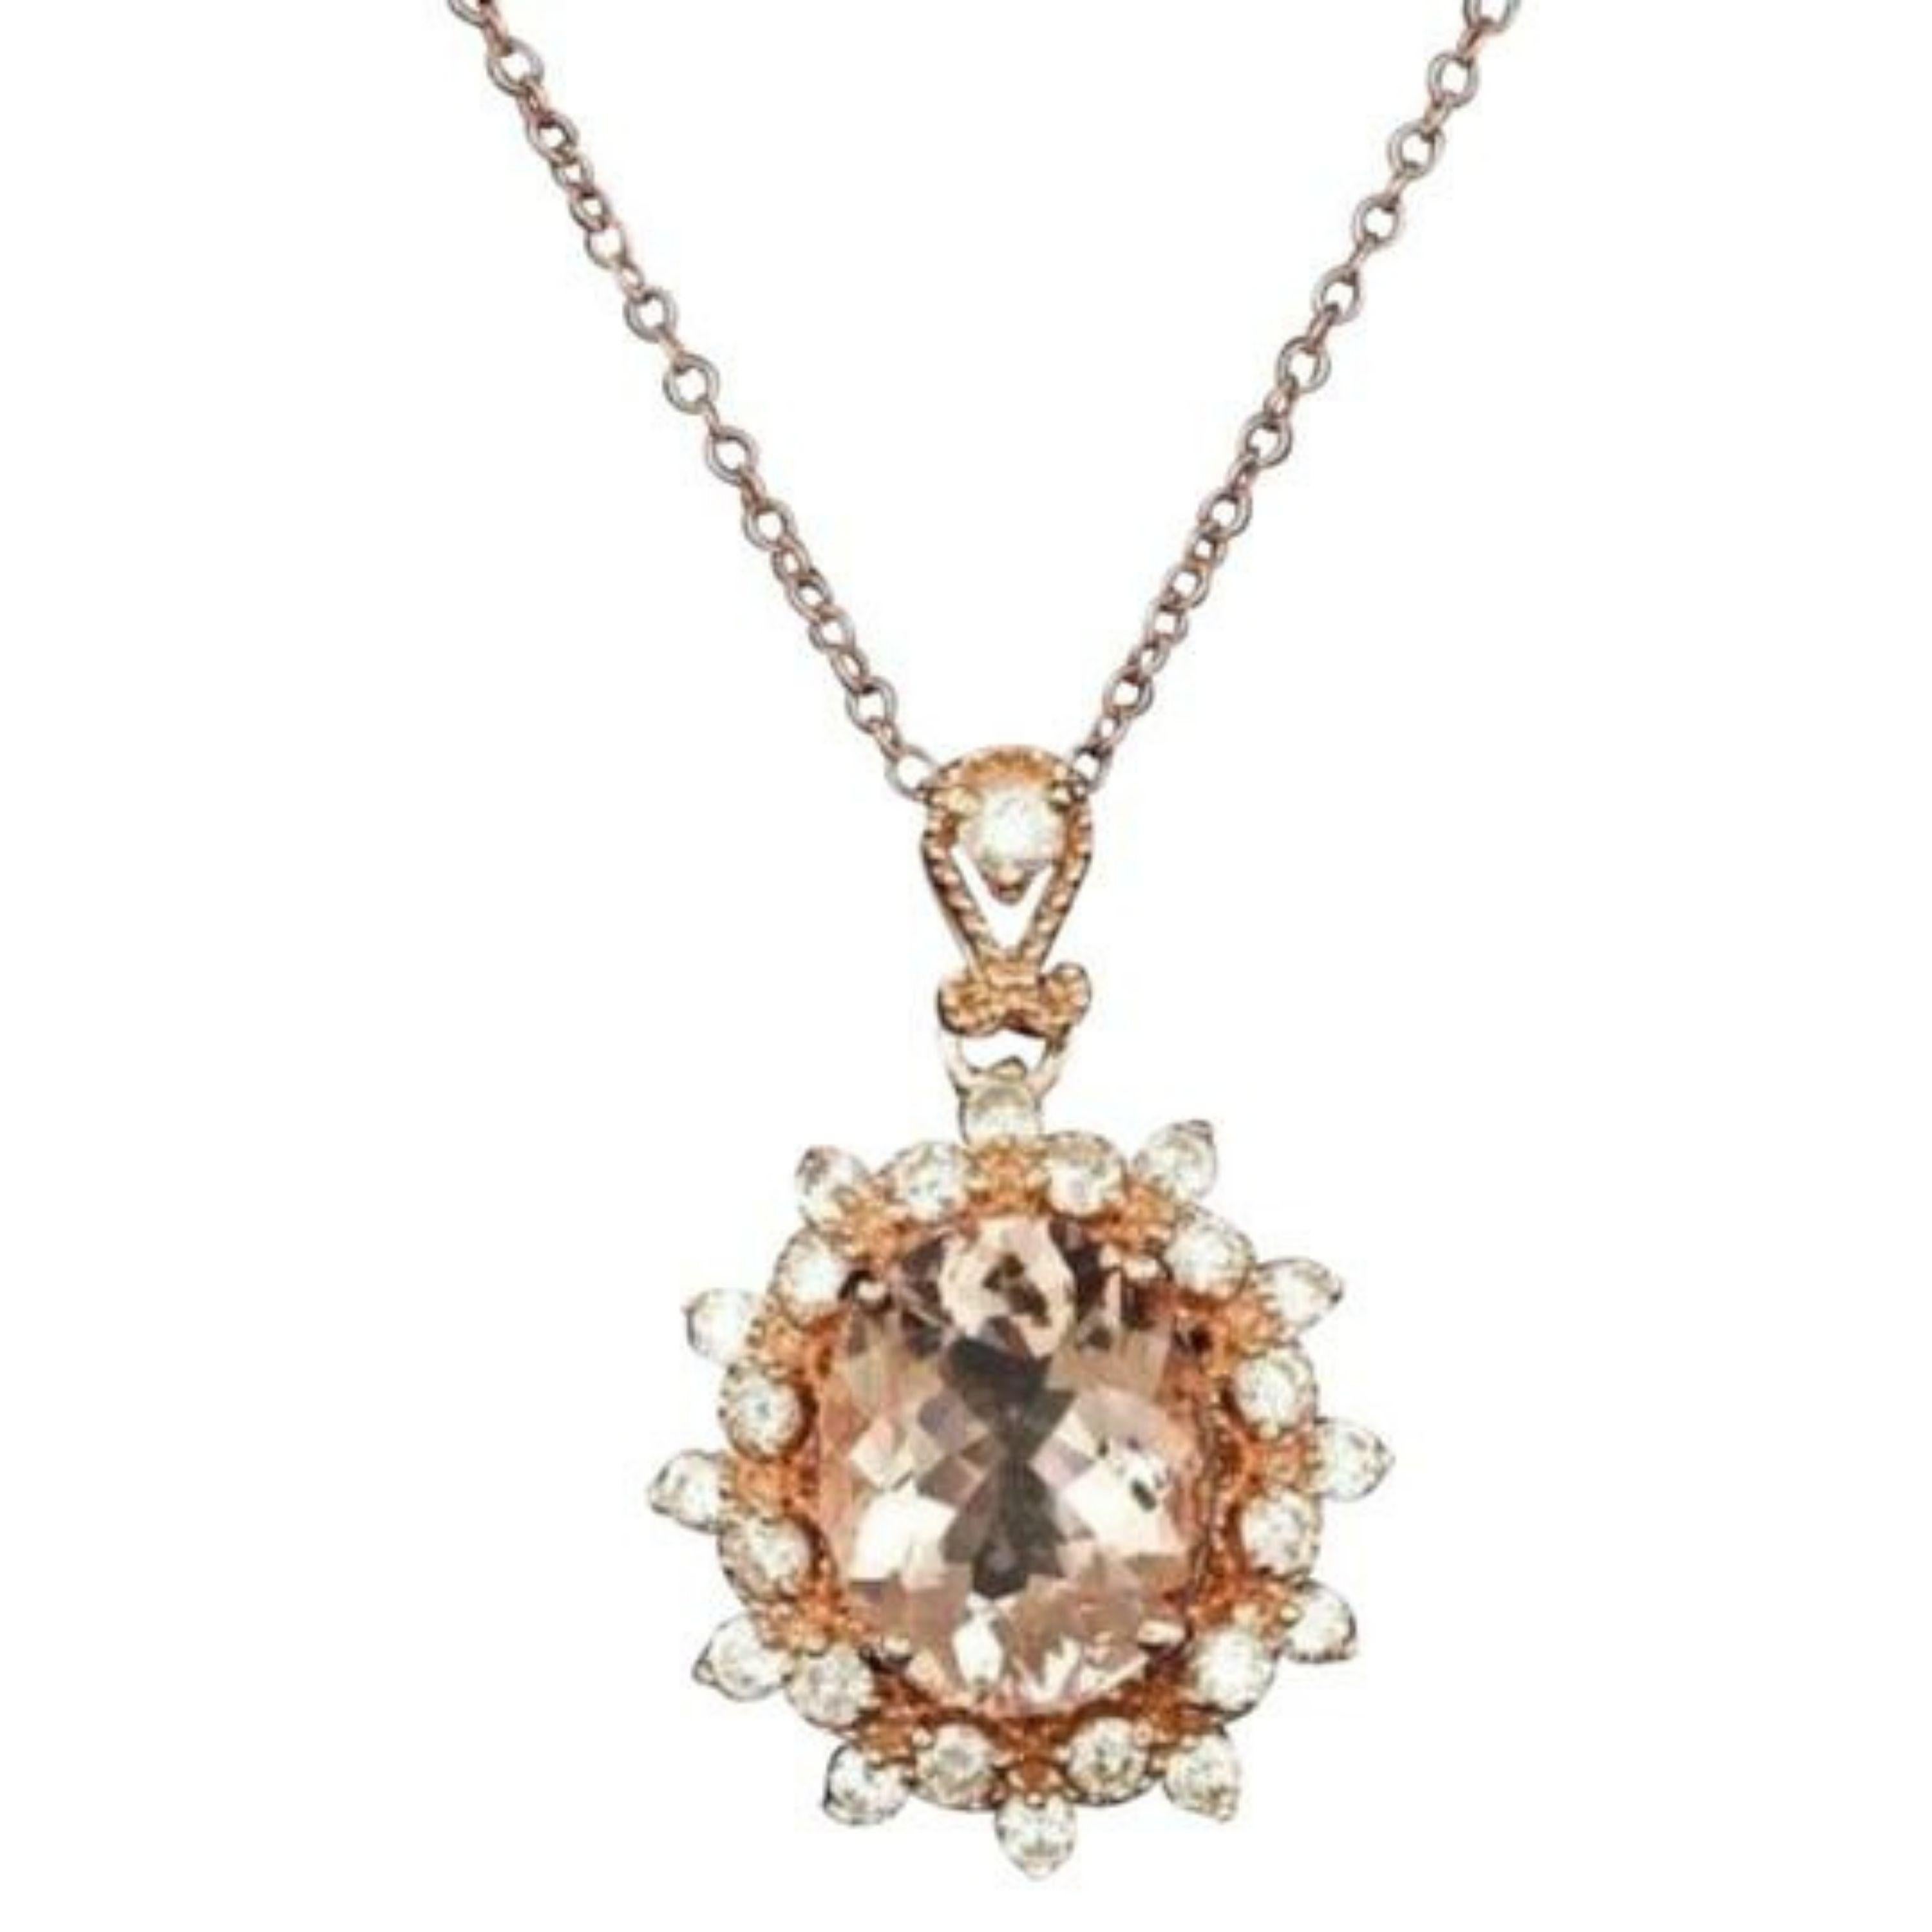 3.65Ct Natural Morganite and Diamond 14K Solid Rose Gold Necklace

Amazing looking piece!

Stamped: 14K

Natural Oval Cut Morganite Weights: Approx. 3.00 Carats

Morganite Measures: Approx. 11 x 9mm

Total Natural Round Diamond weights: 0.65 Carats